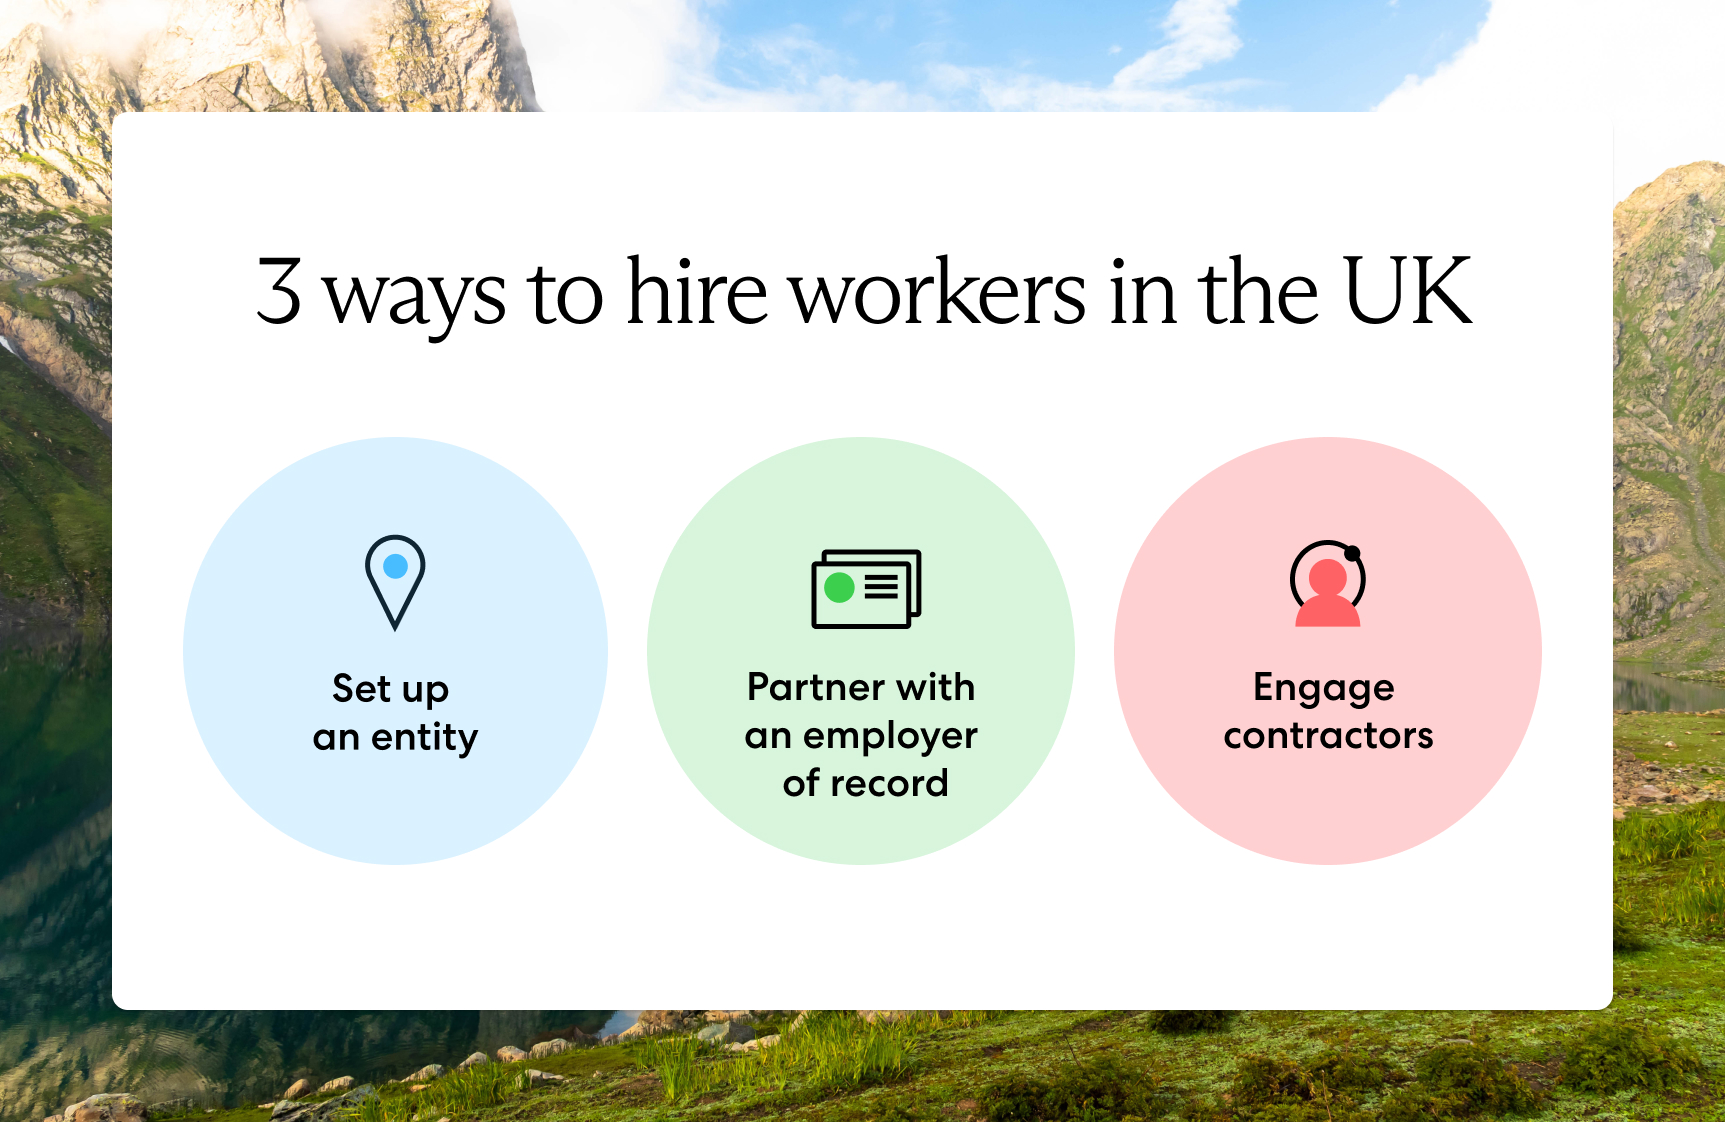 A U.S. company can hire a U.K. employee by setting up an entity, working with an EOR, or engaging British contractors.